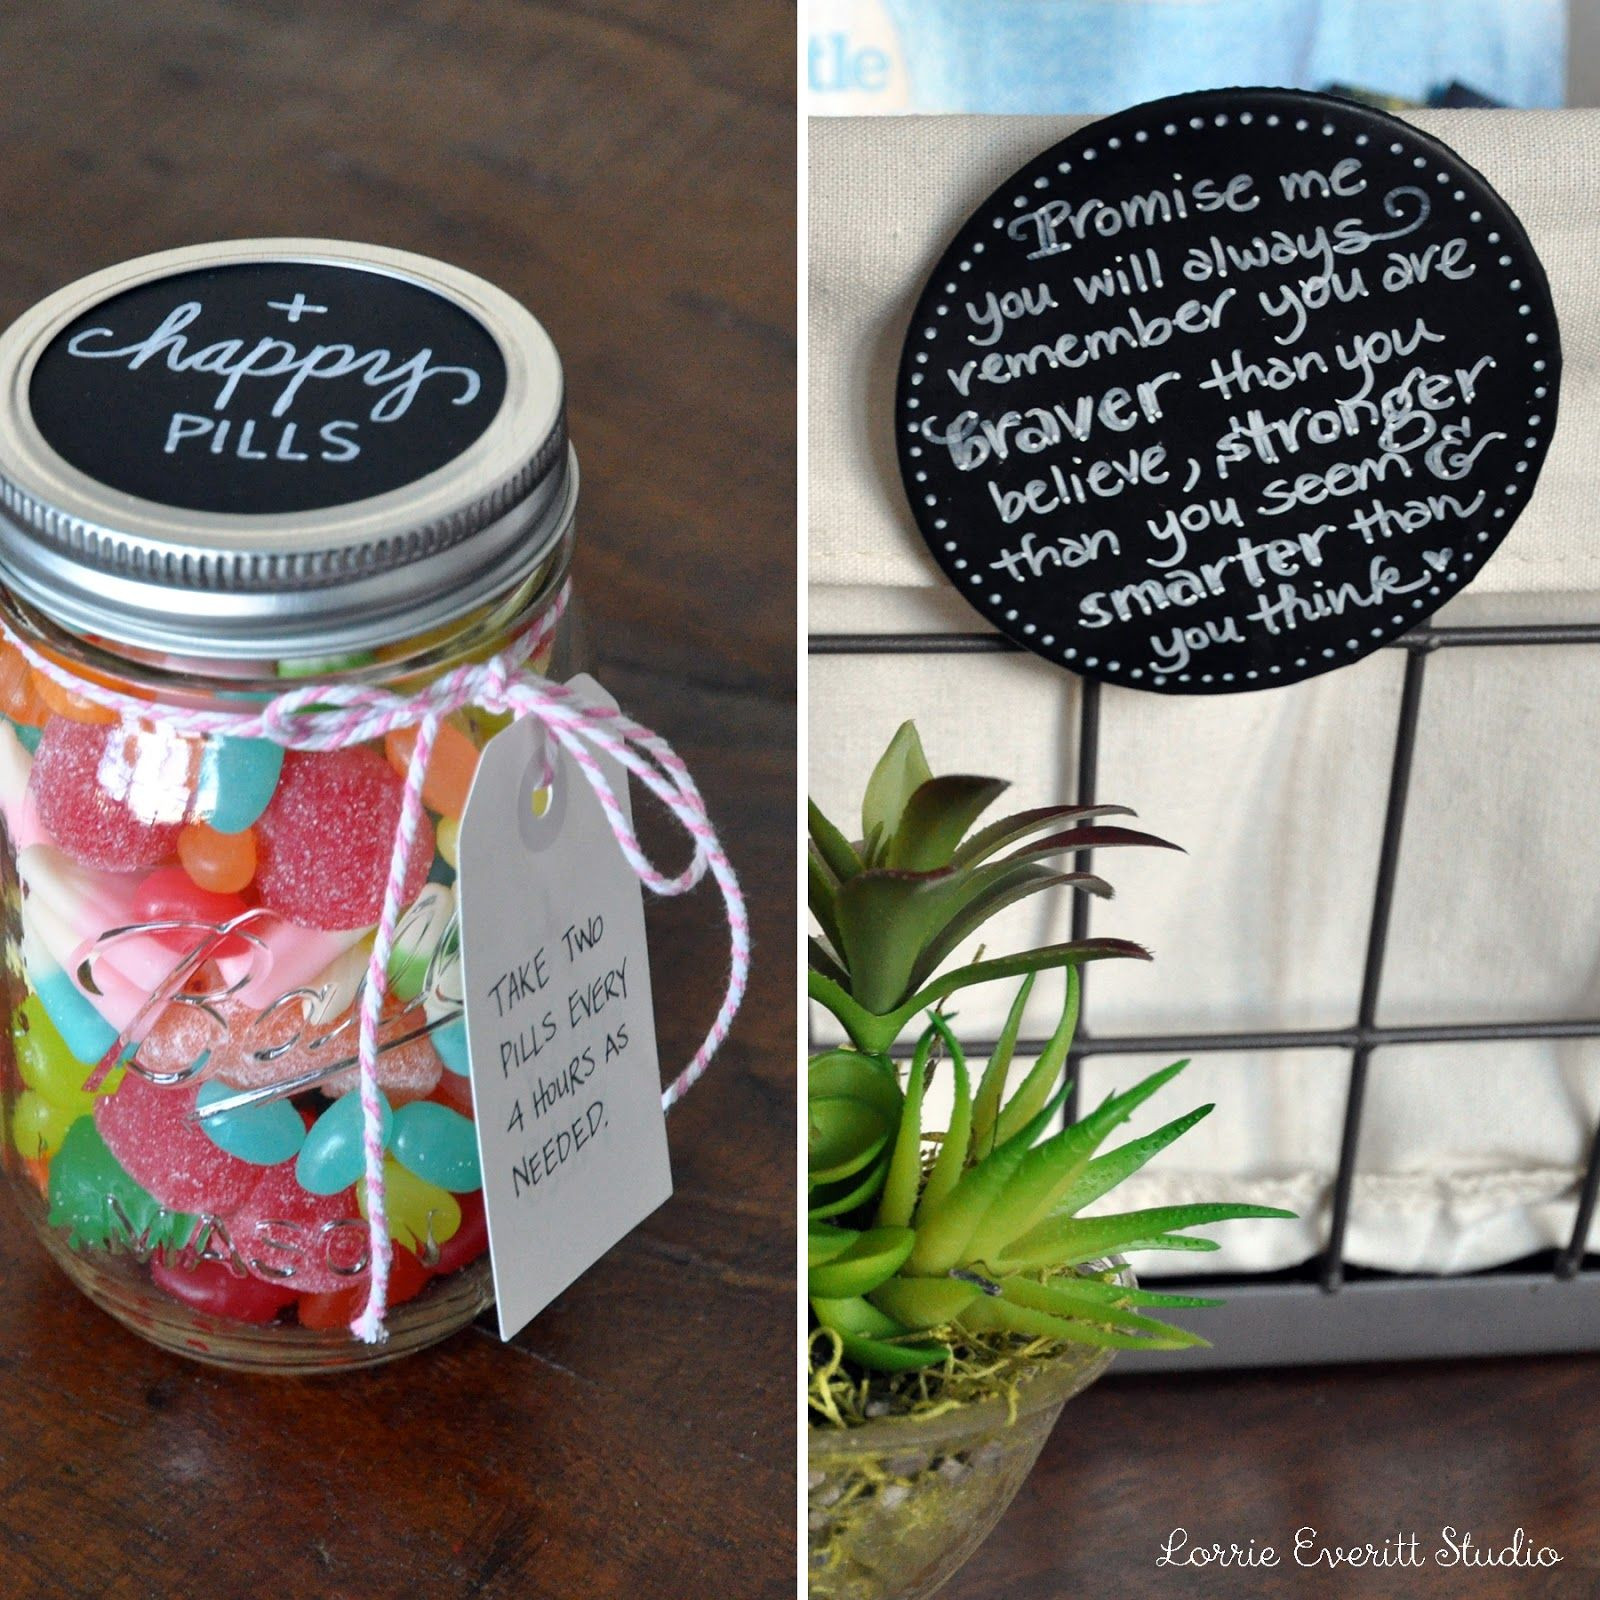 Get Well Gifts For Kids With Broken Arm
 "happy pills" can s in a jars t idea to make with